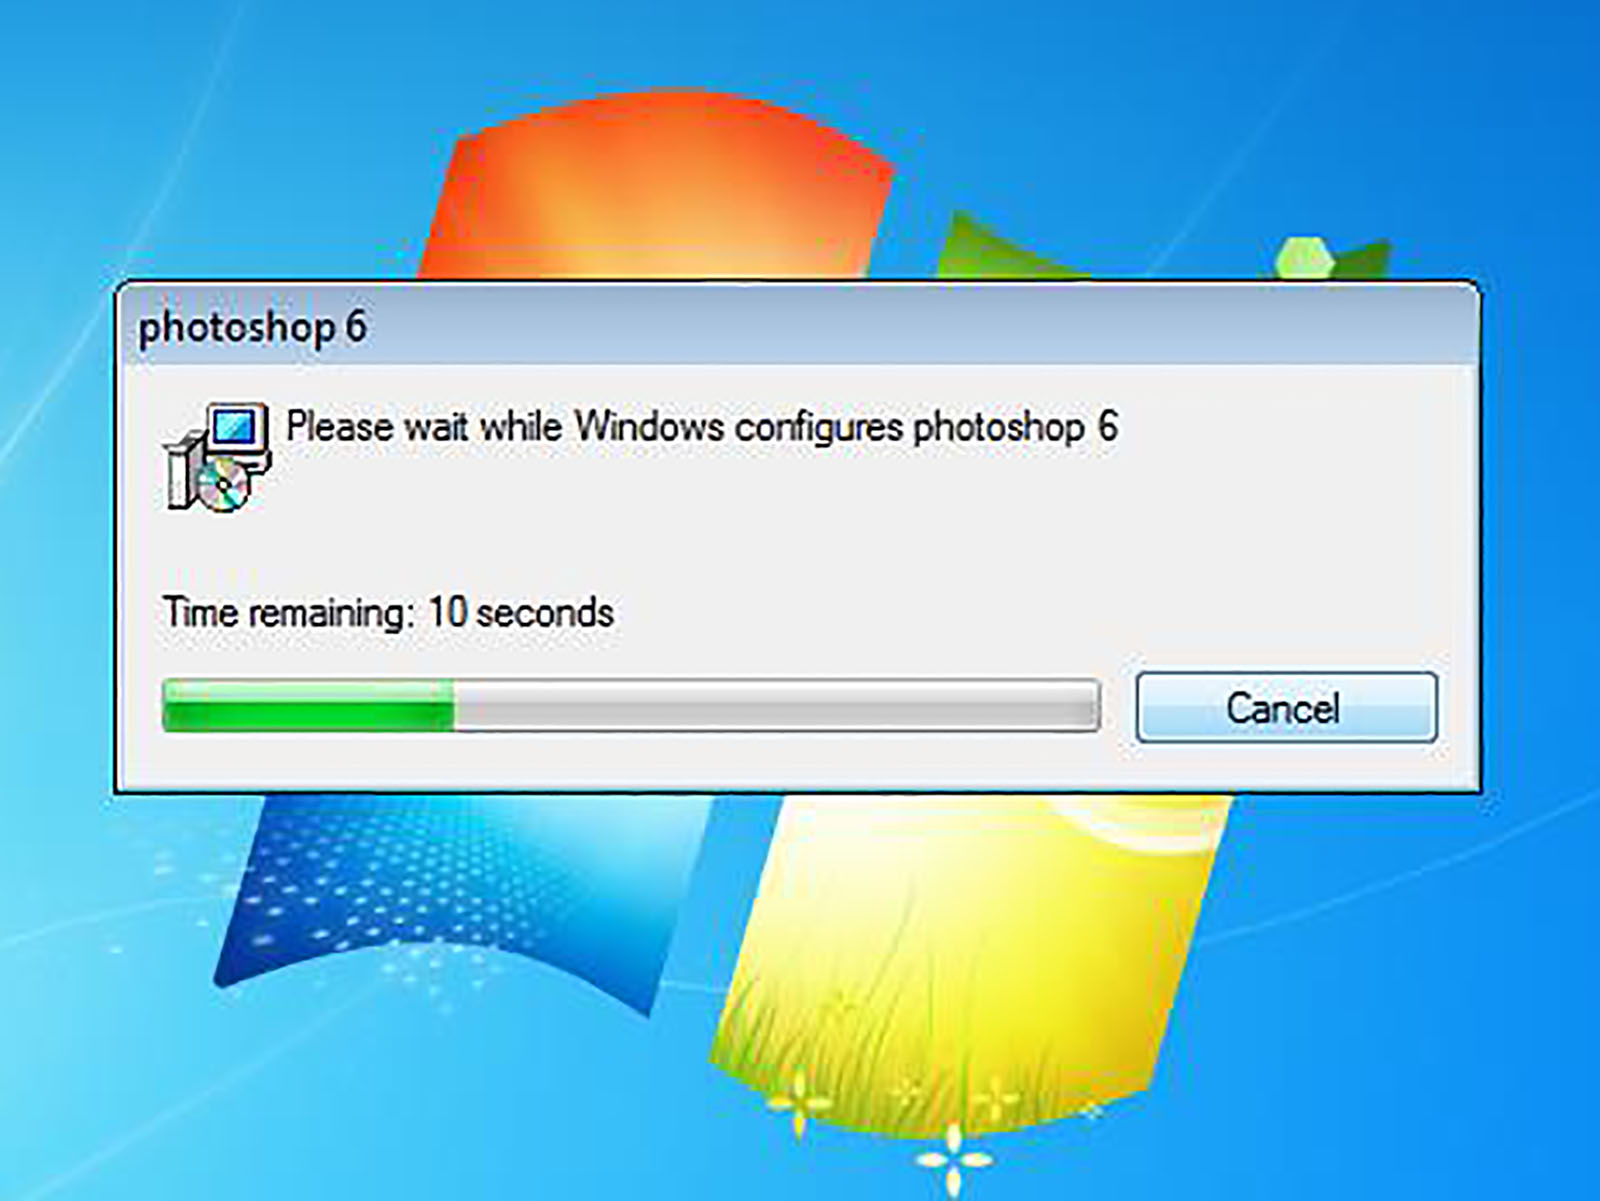 can adobe photoshop 5.0 be installed on windows 7